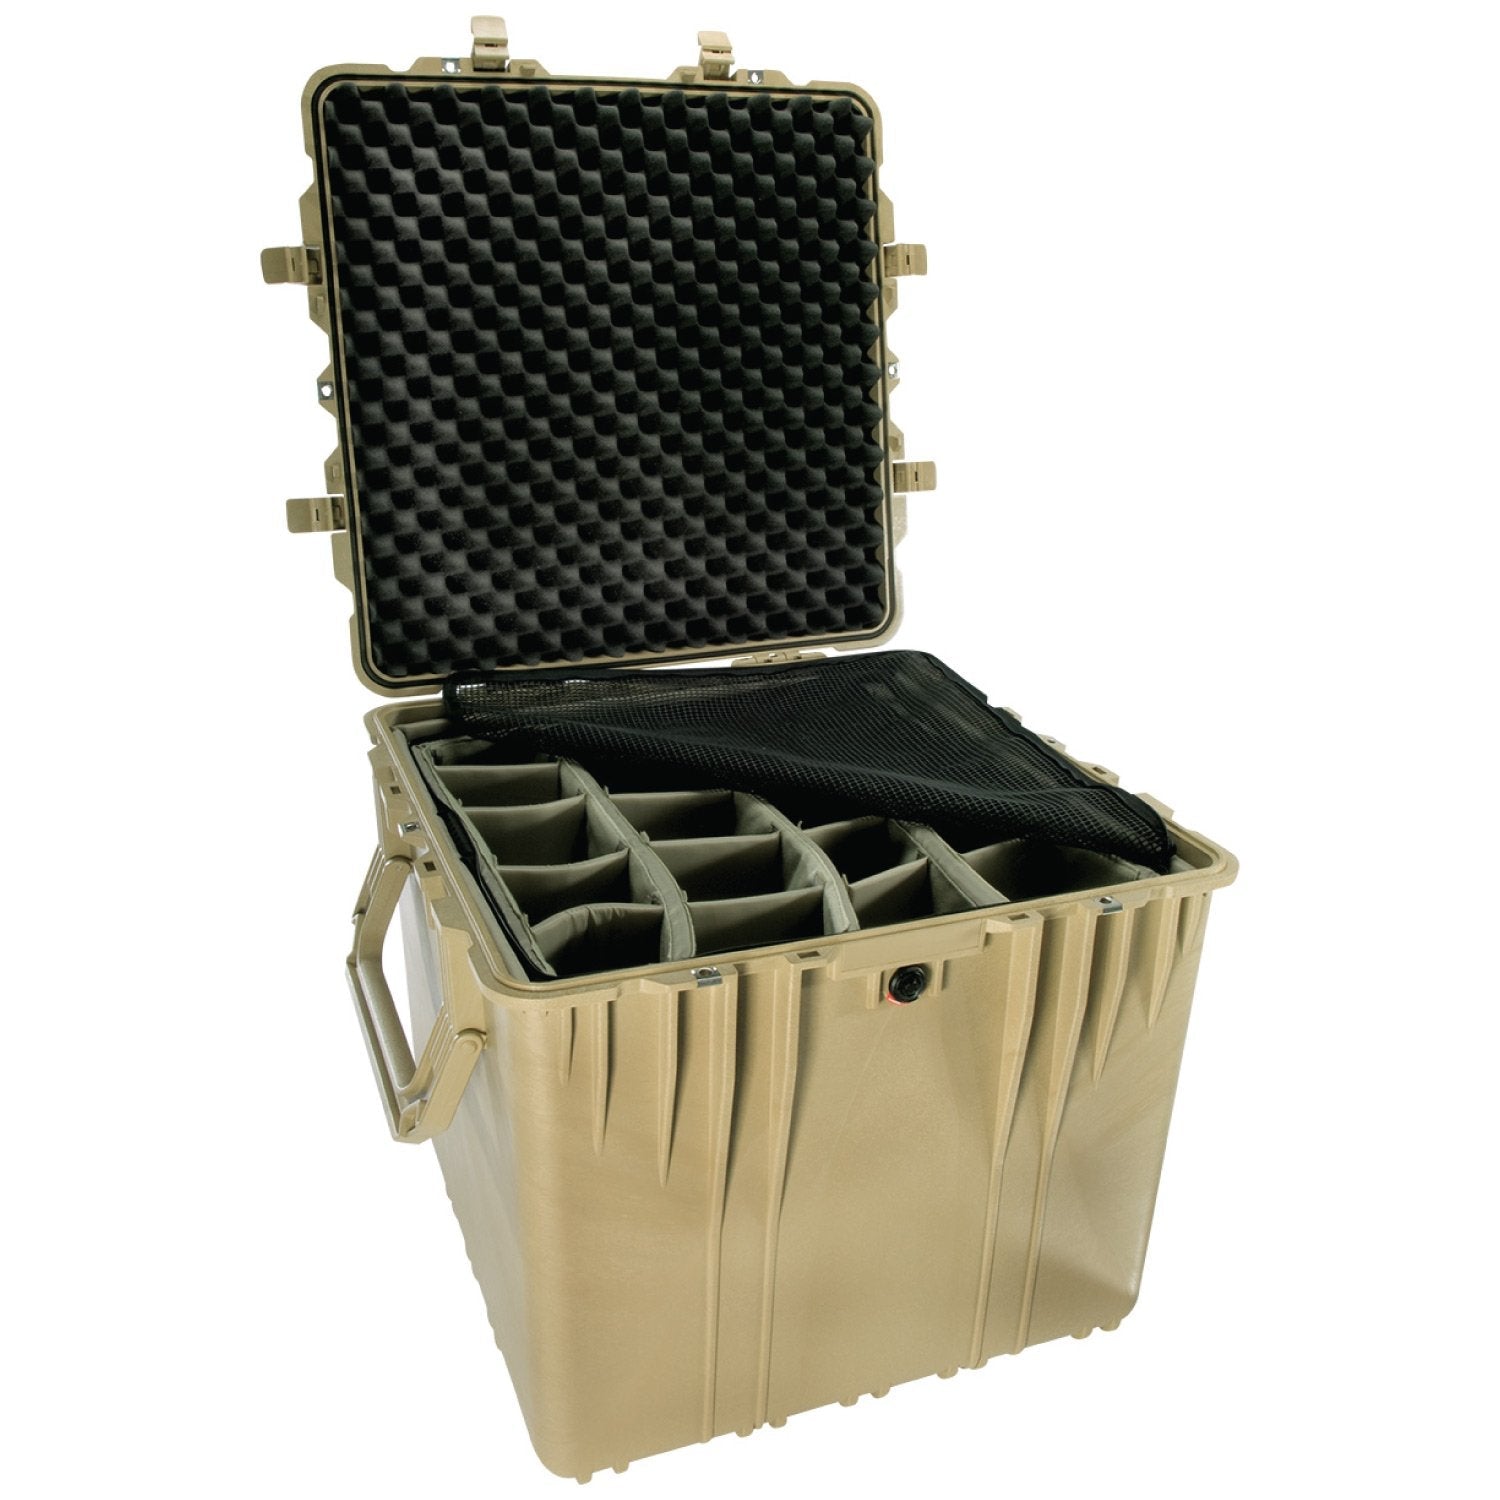 Pelican 0370 Protector Cube Case Desert Tan Bags, Packs and Cases Pelican Products Without Foam Tactical Gear Supplier Tactical Distributors Australia